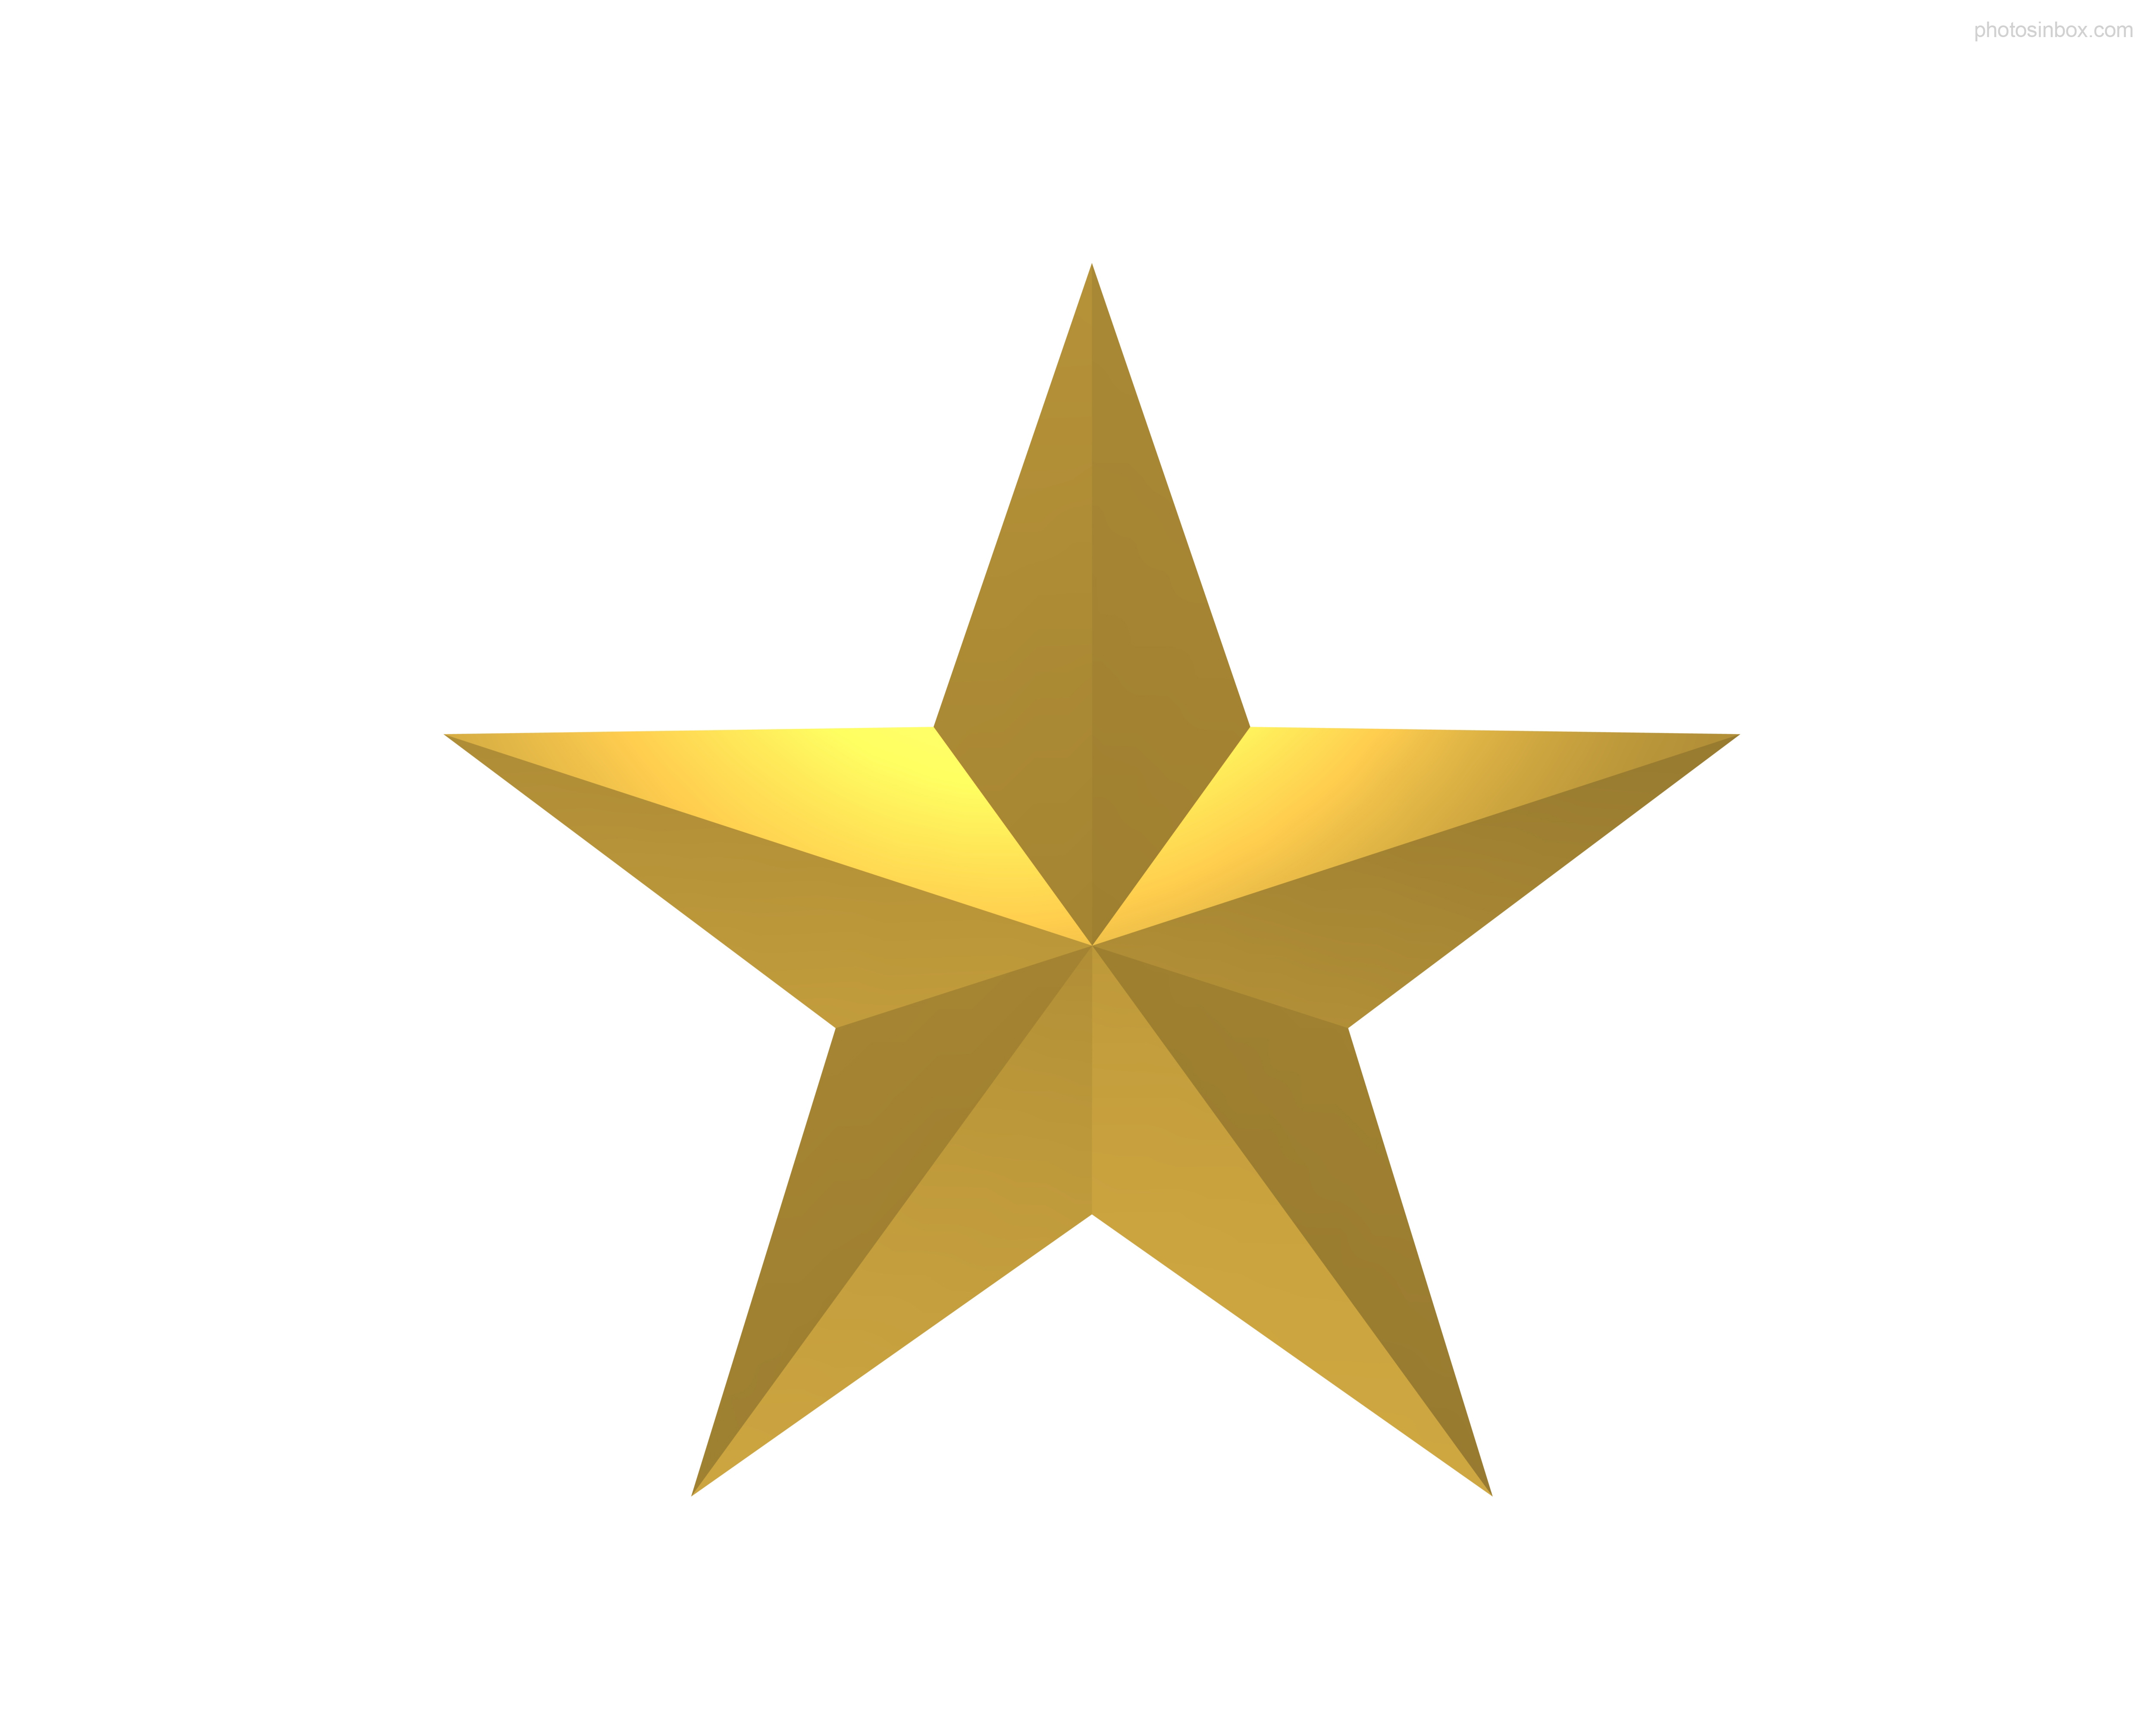 Gold Star No Images Hd Image Clipart